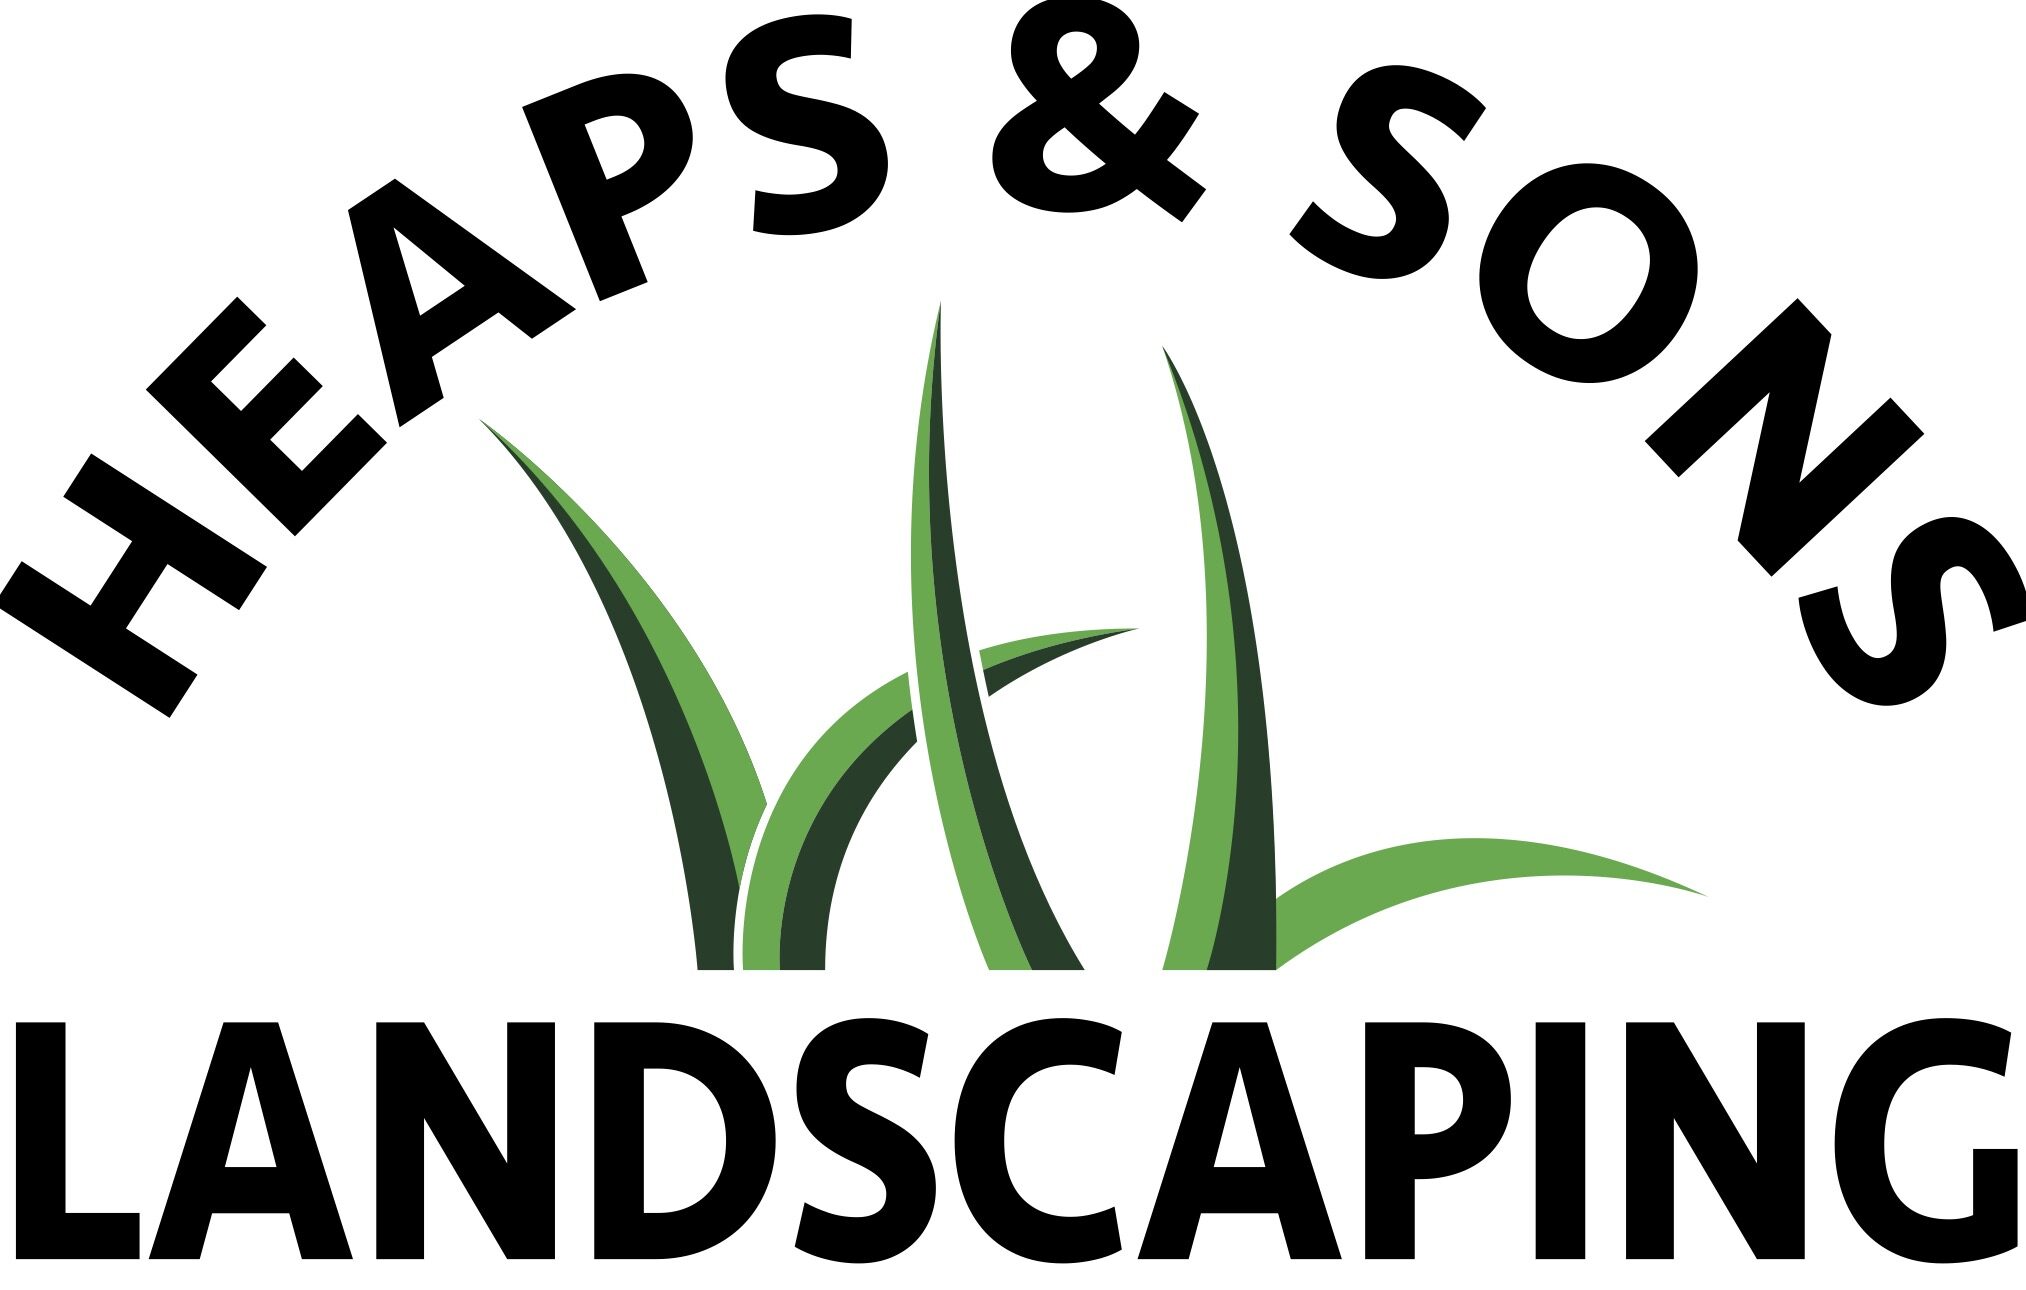 Heaps Landscaping